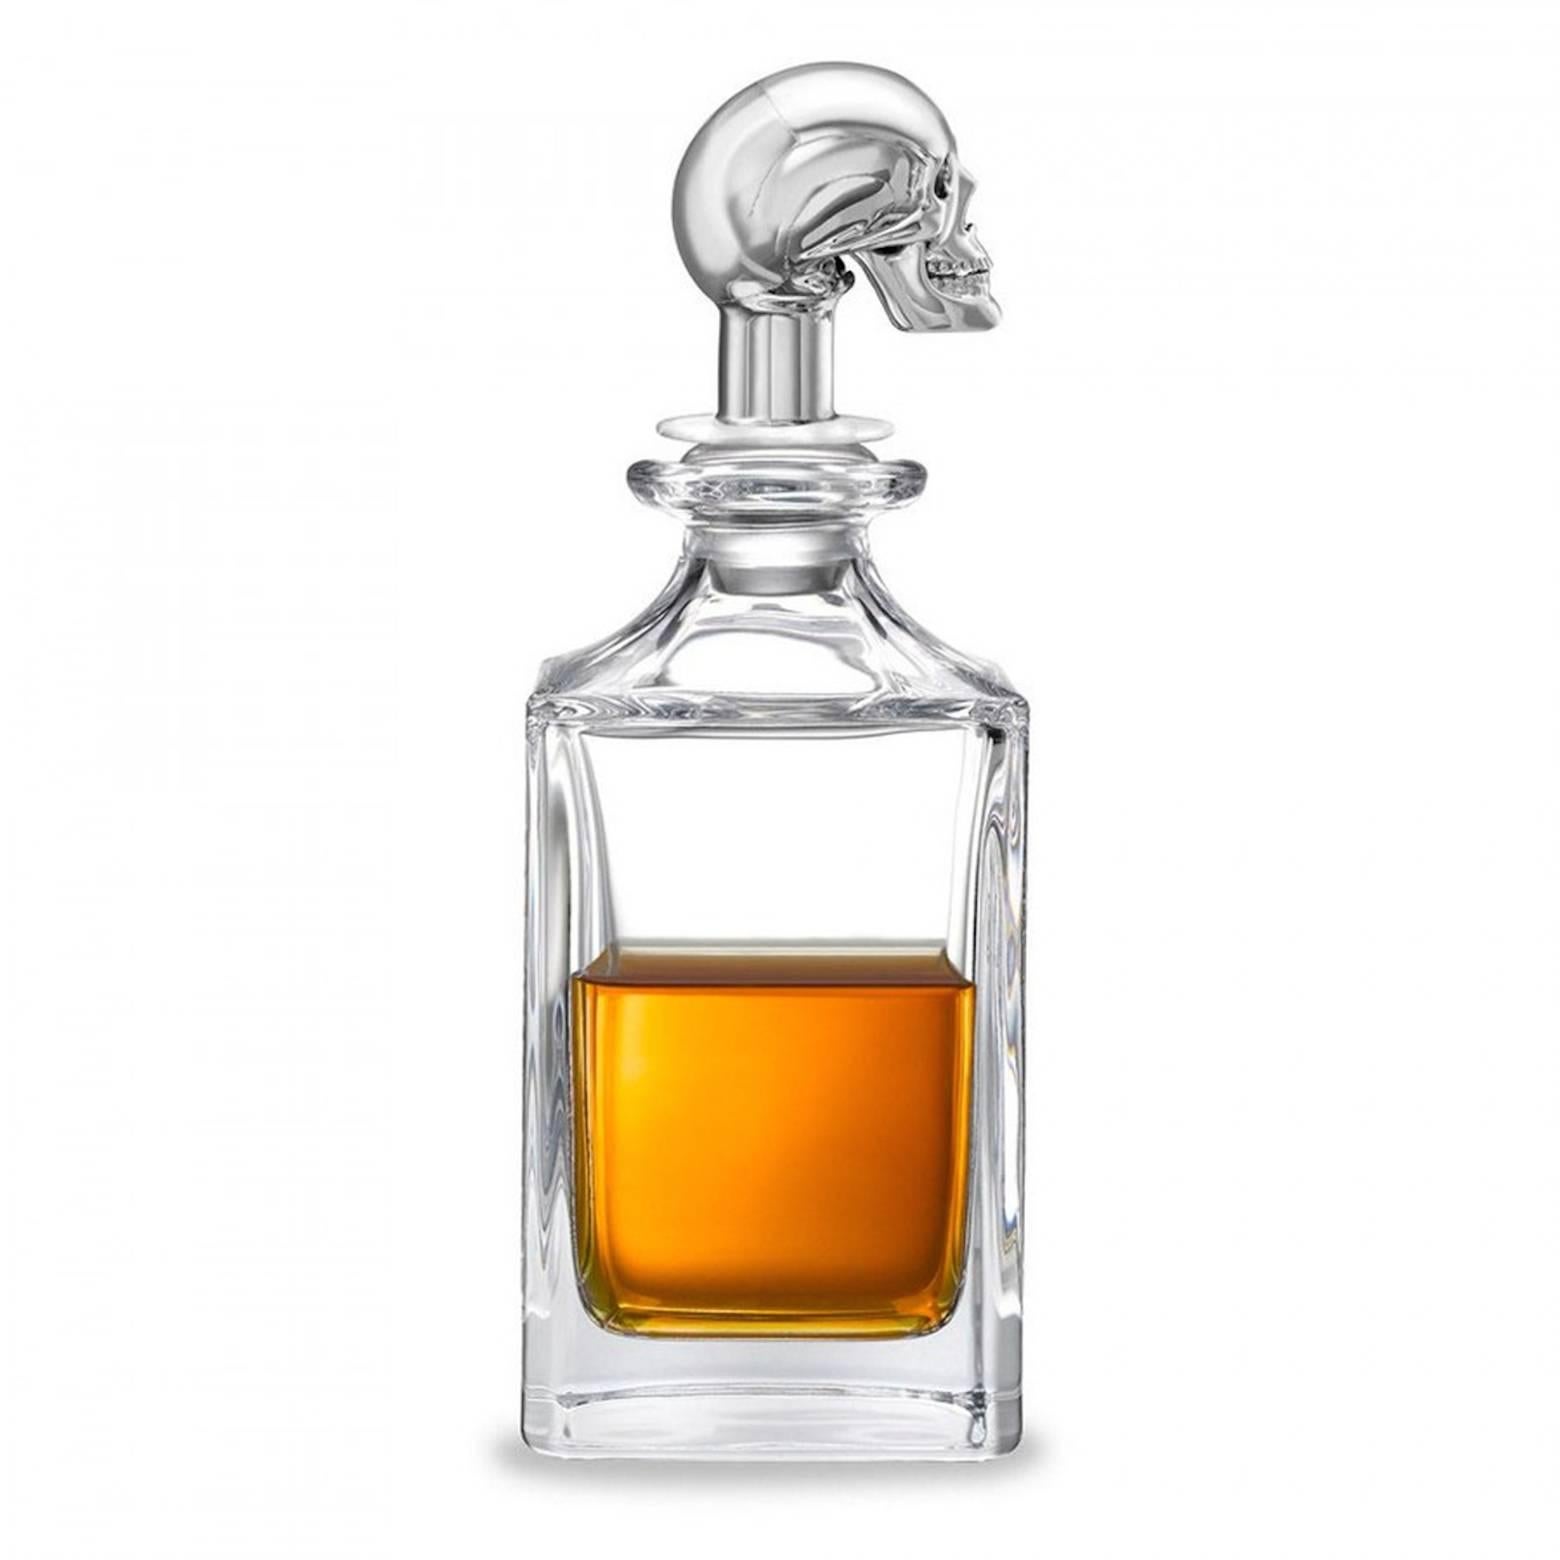  
PLEASE NOTE: OUR PRICE IS FULLY INCLUSIVE OF SHIPPING, IMPORTATION TAXES & DUTIES.

Our beautiful decanters feature a crystal glass decanter base, handmade by craftsman in Dartington's Devon based workshops.

This decanter is finished